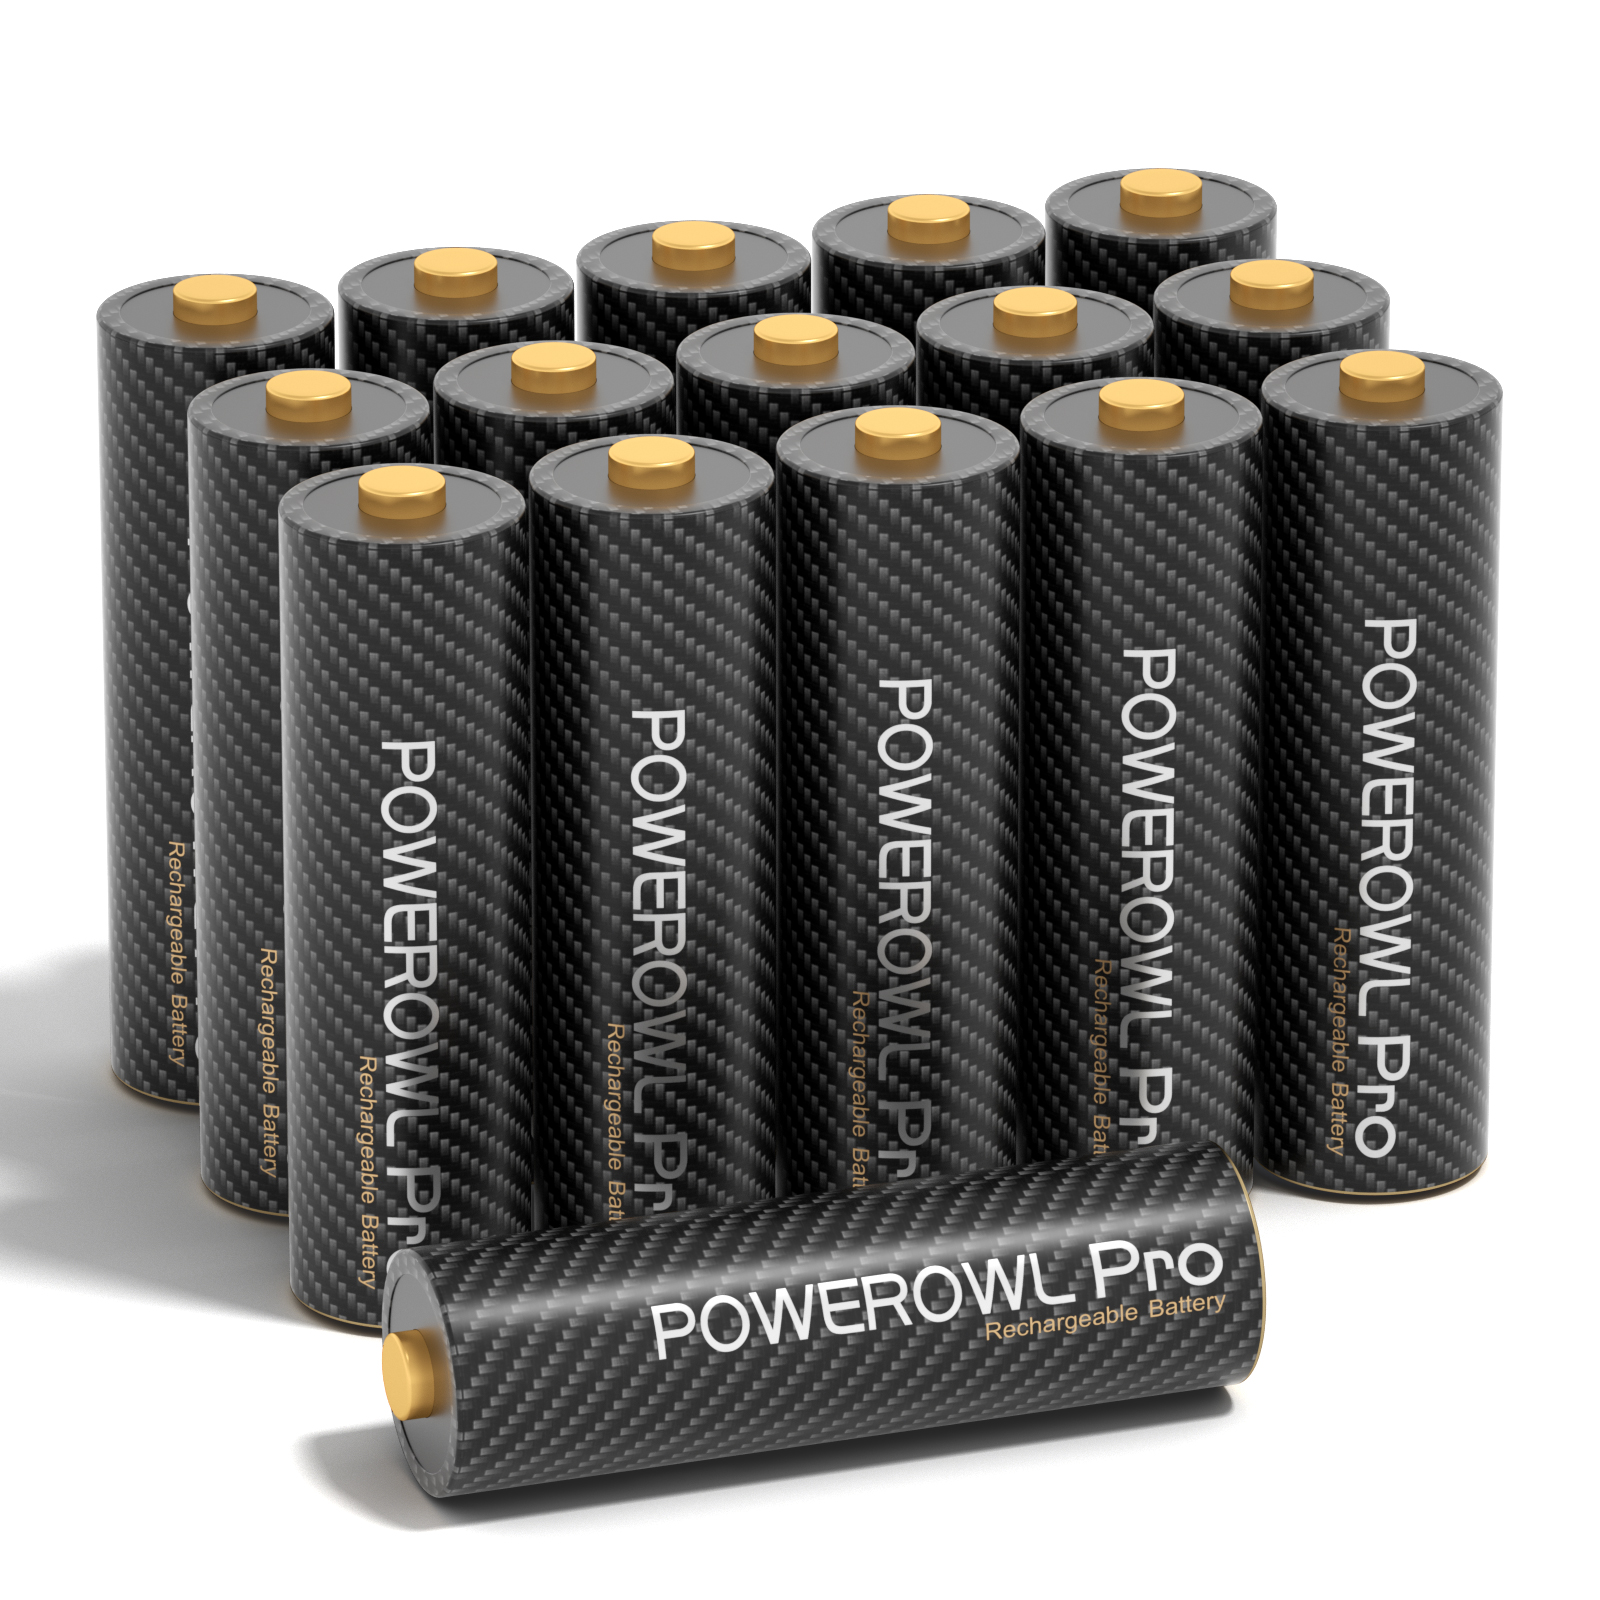 POWEROWL Goldtop Rechargeable AA Batteries PRO, High Capacity 2800mAh, Premium NiMH Double A Battery -16 Count